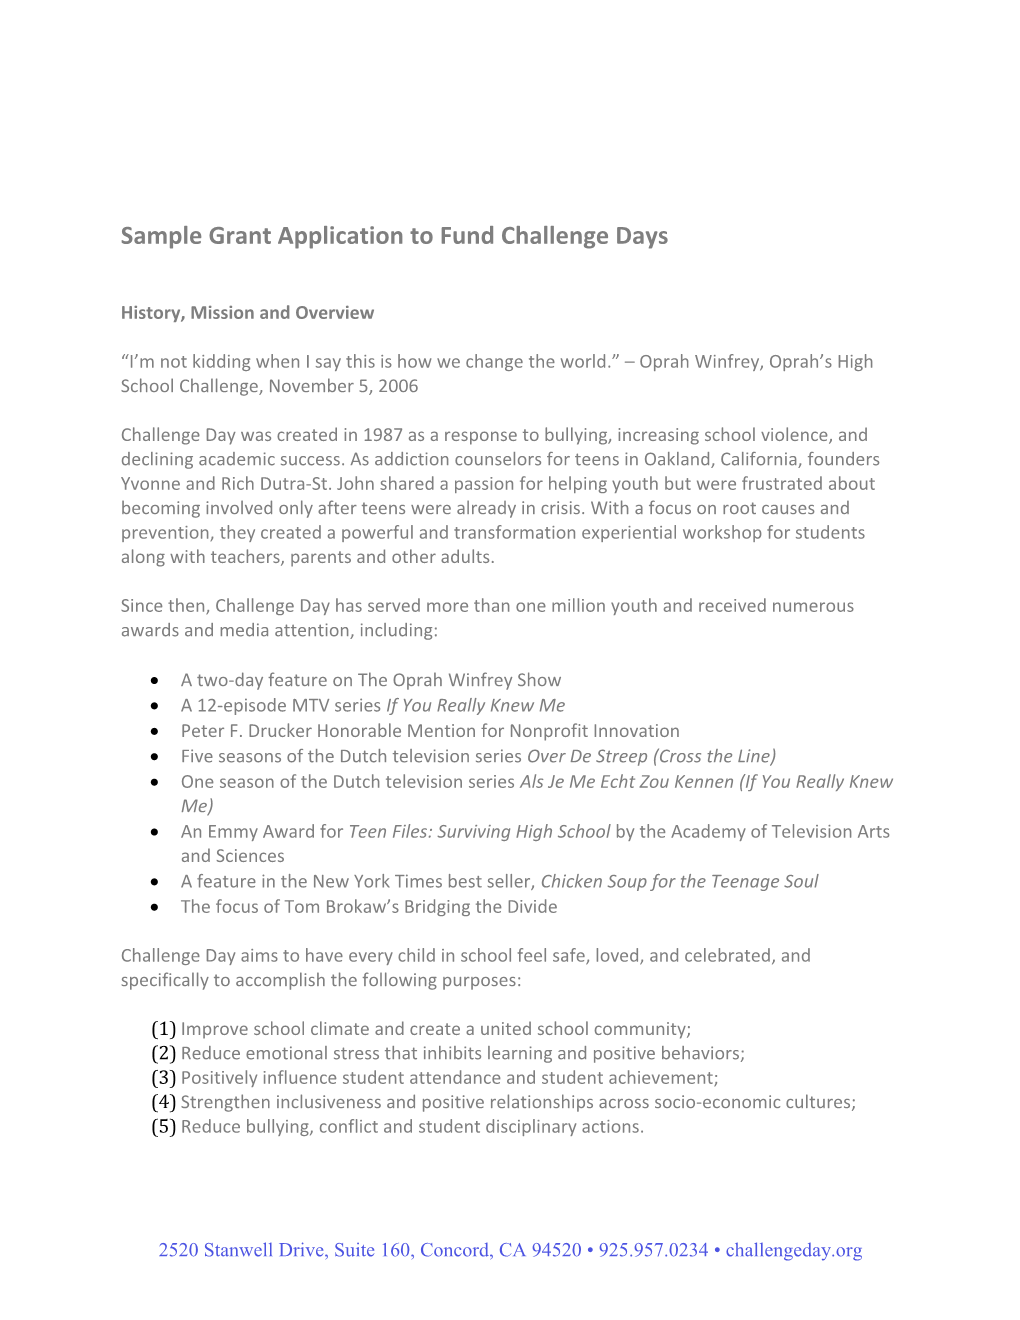 Sample Grant Application to Fund Challenge Days